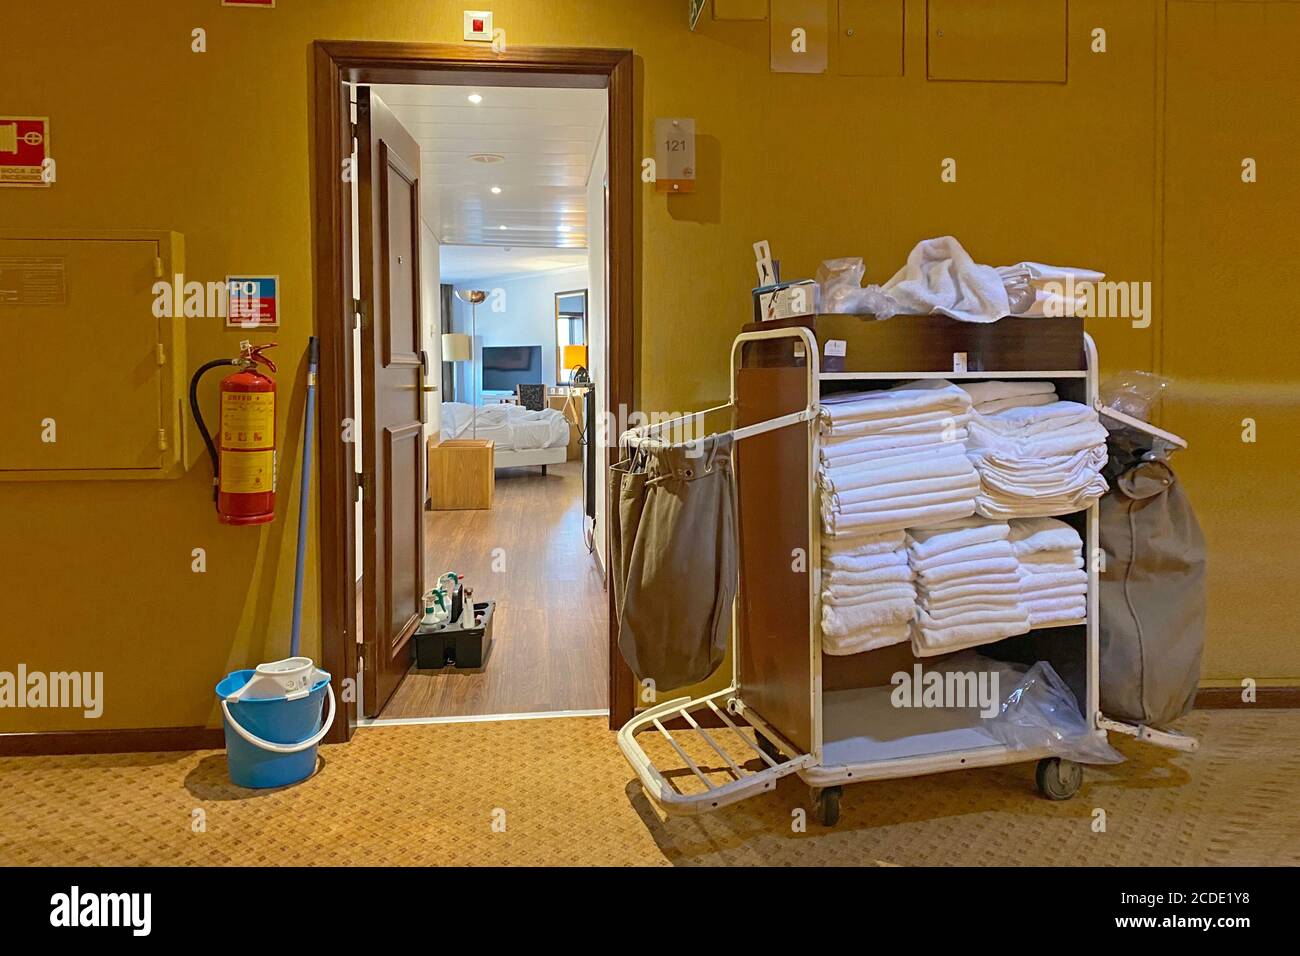 https://c8.alamy.com/comp/2CDE1Y8/impressions-from-lisbon-during-the-coronavirus-pandemic-on-august-19-2020-housekeeping-in-a-hotel-cleaning-lady-cleaning-worker-work-in-a-hotel-a-cart-with-bed-linen-and-towels-stands-in-front-of-an-open-door-of-a-hotel-room-usage-worldwide-2CDE1Y8.jpg